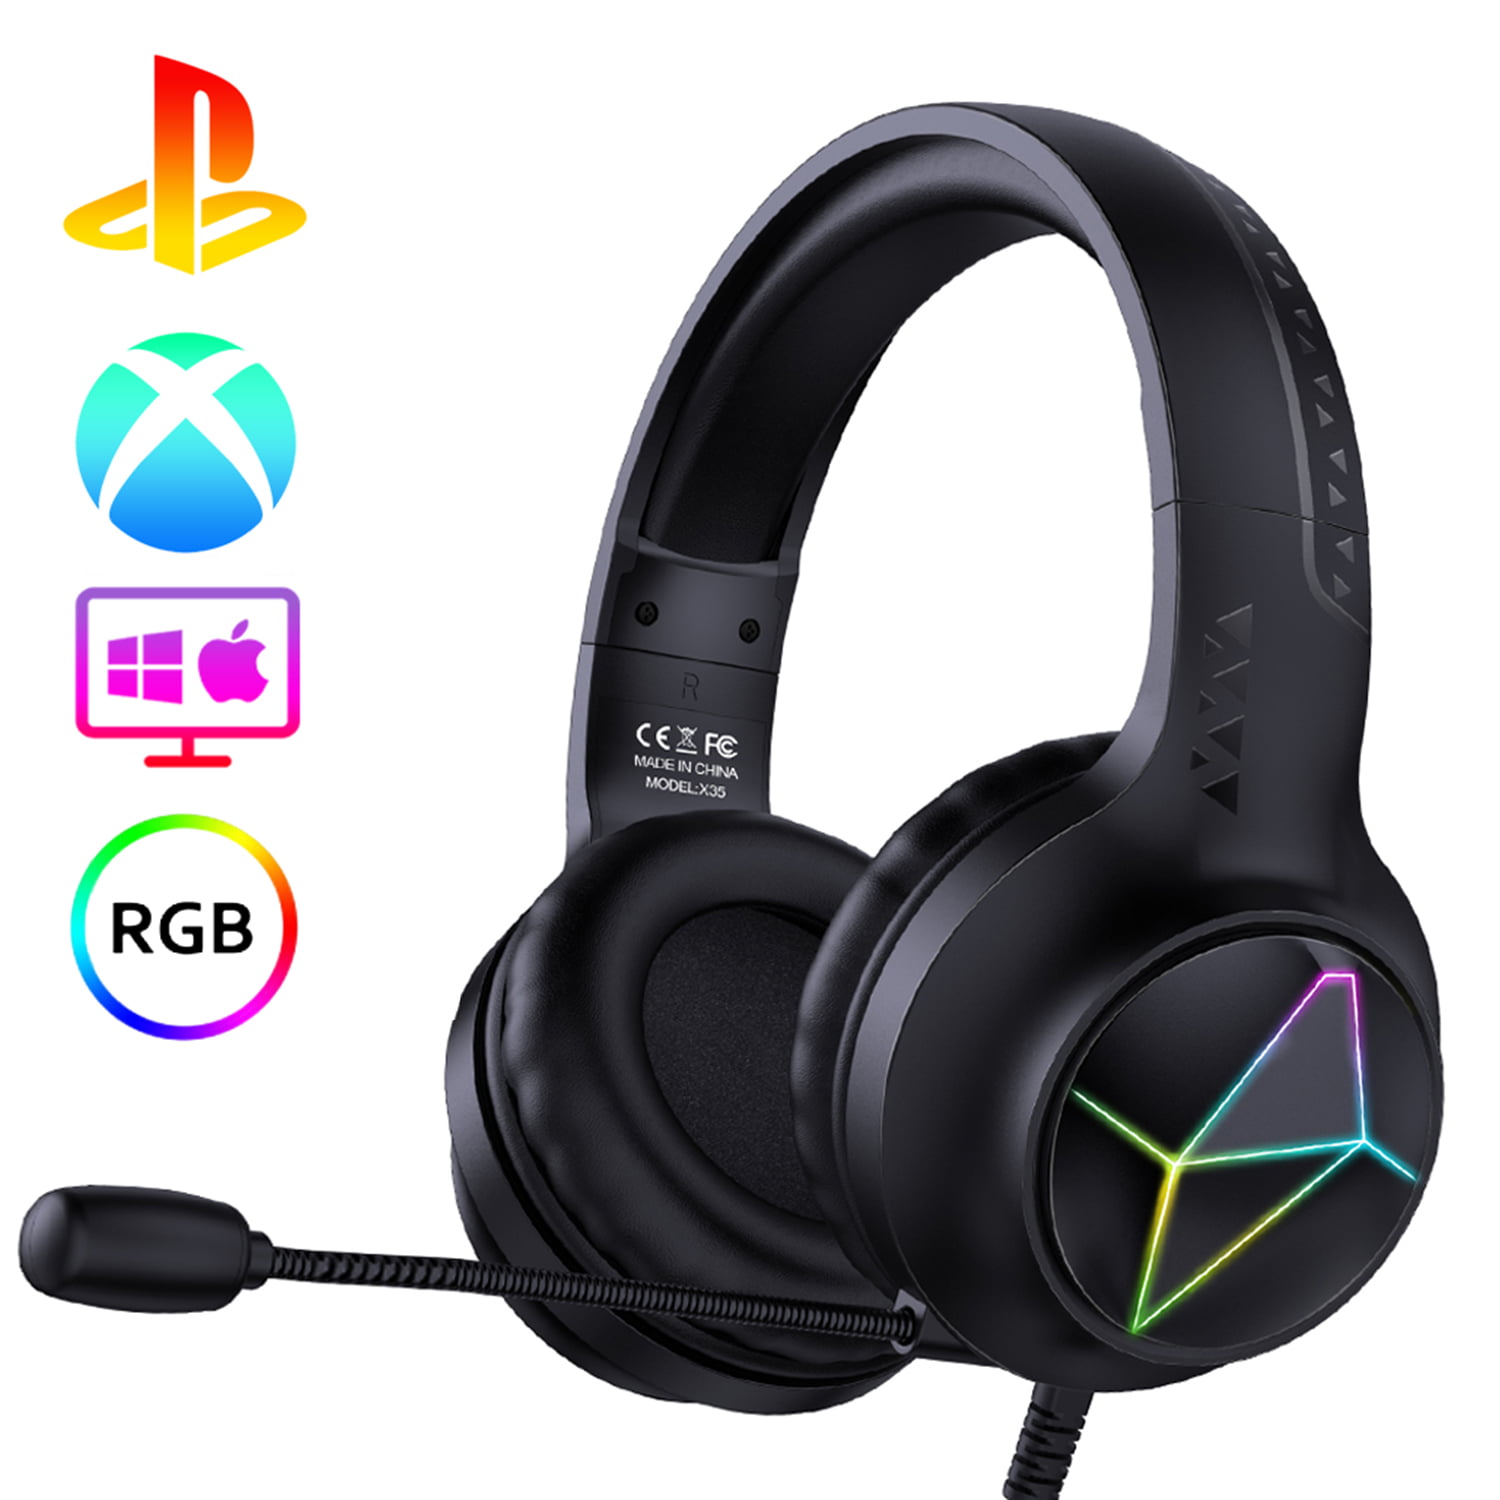 De Kamer Paine Gillic marionet ONIKUMA X35 Gaming Headset, Stereo Bass Surround RGB Noise Cancelling over  Ear Headphones, for PS4 PC Nintendo Switch Tablet, Noise Cancelling Mic LED  Light, Designed Technically for Gamer - Walmart.com